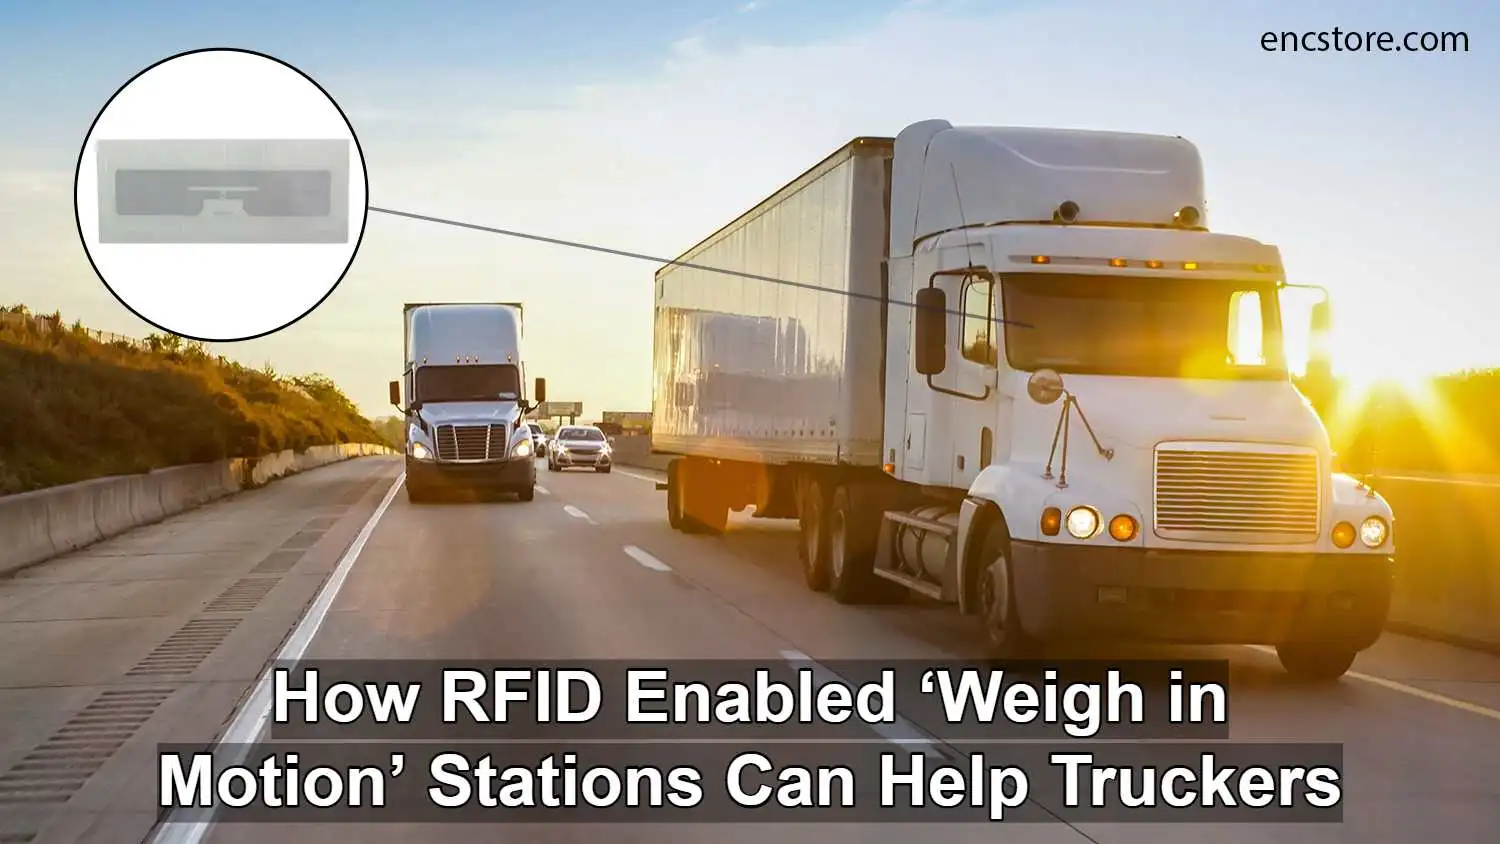 RFID Enabled Weigh in Motion Stations